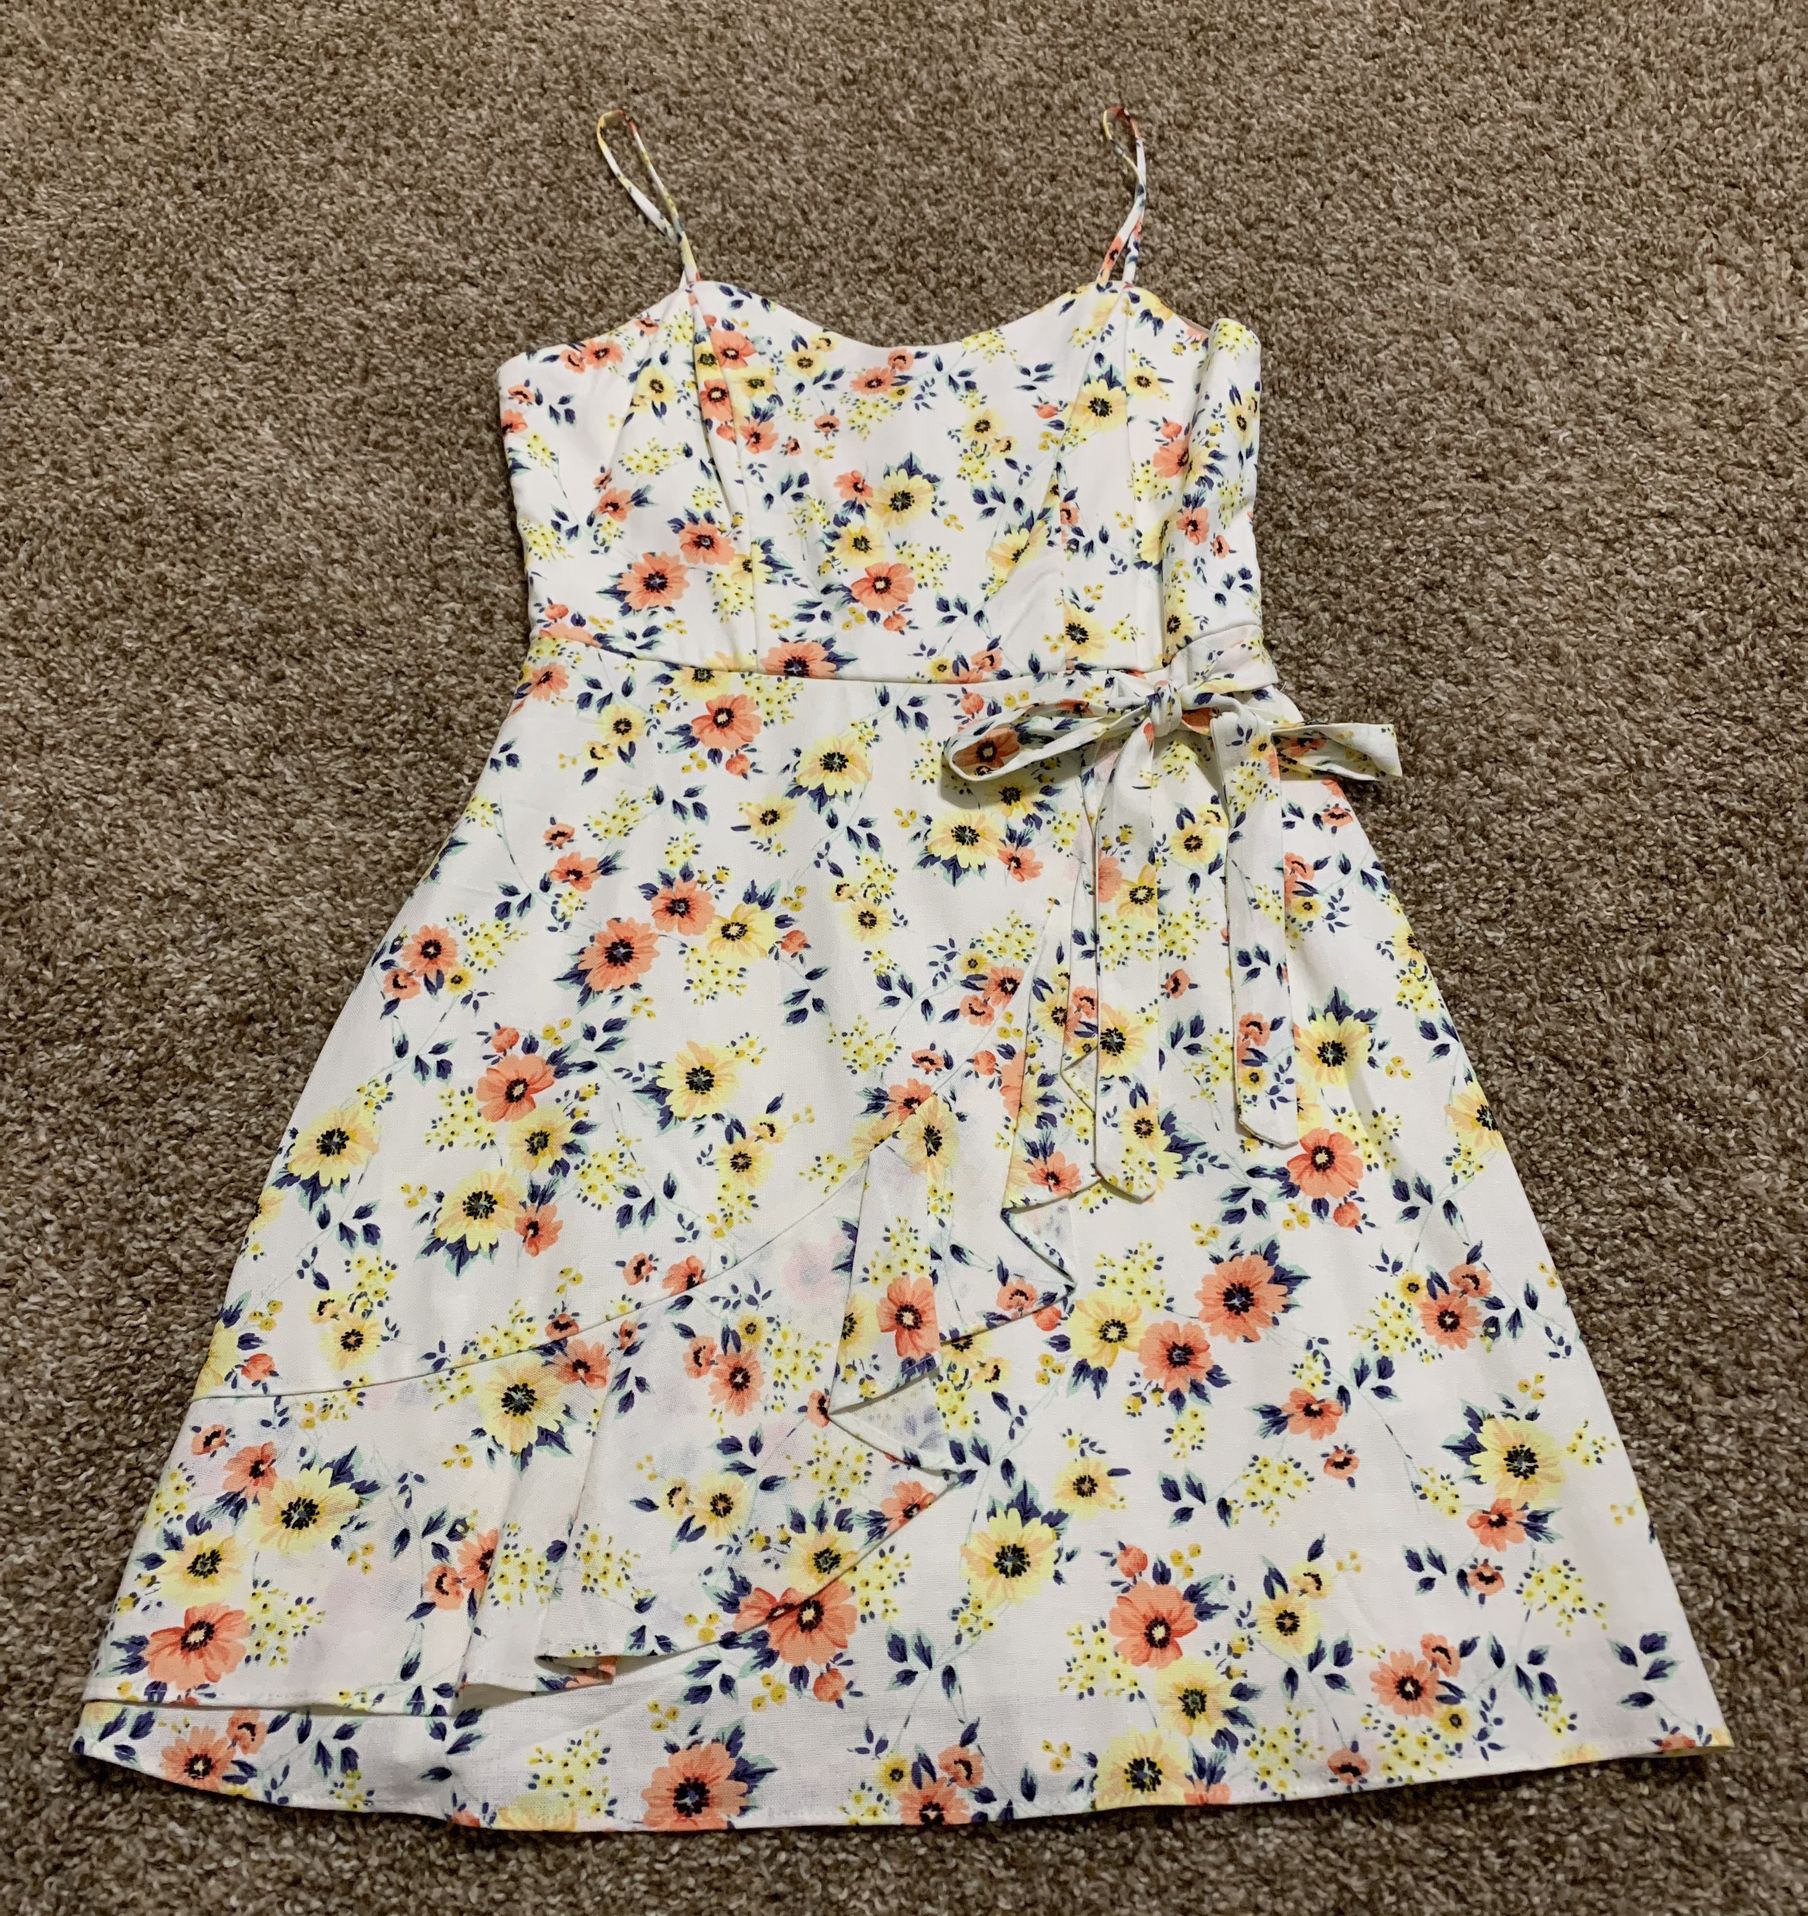 Gorgeous sundress size 5 in juniors